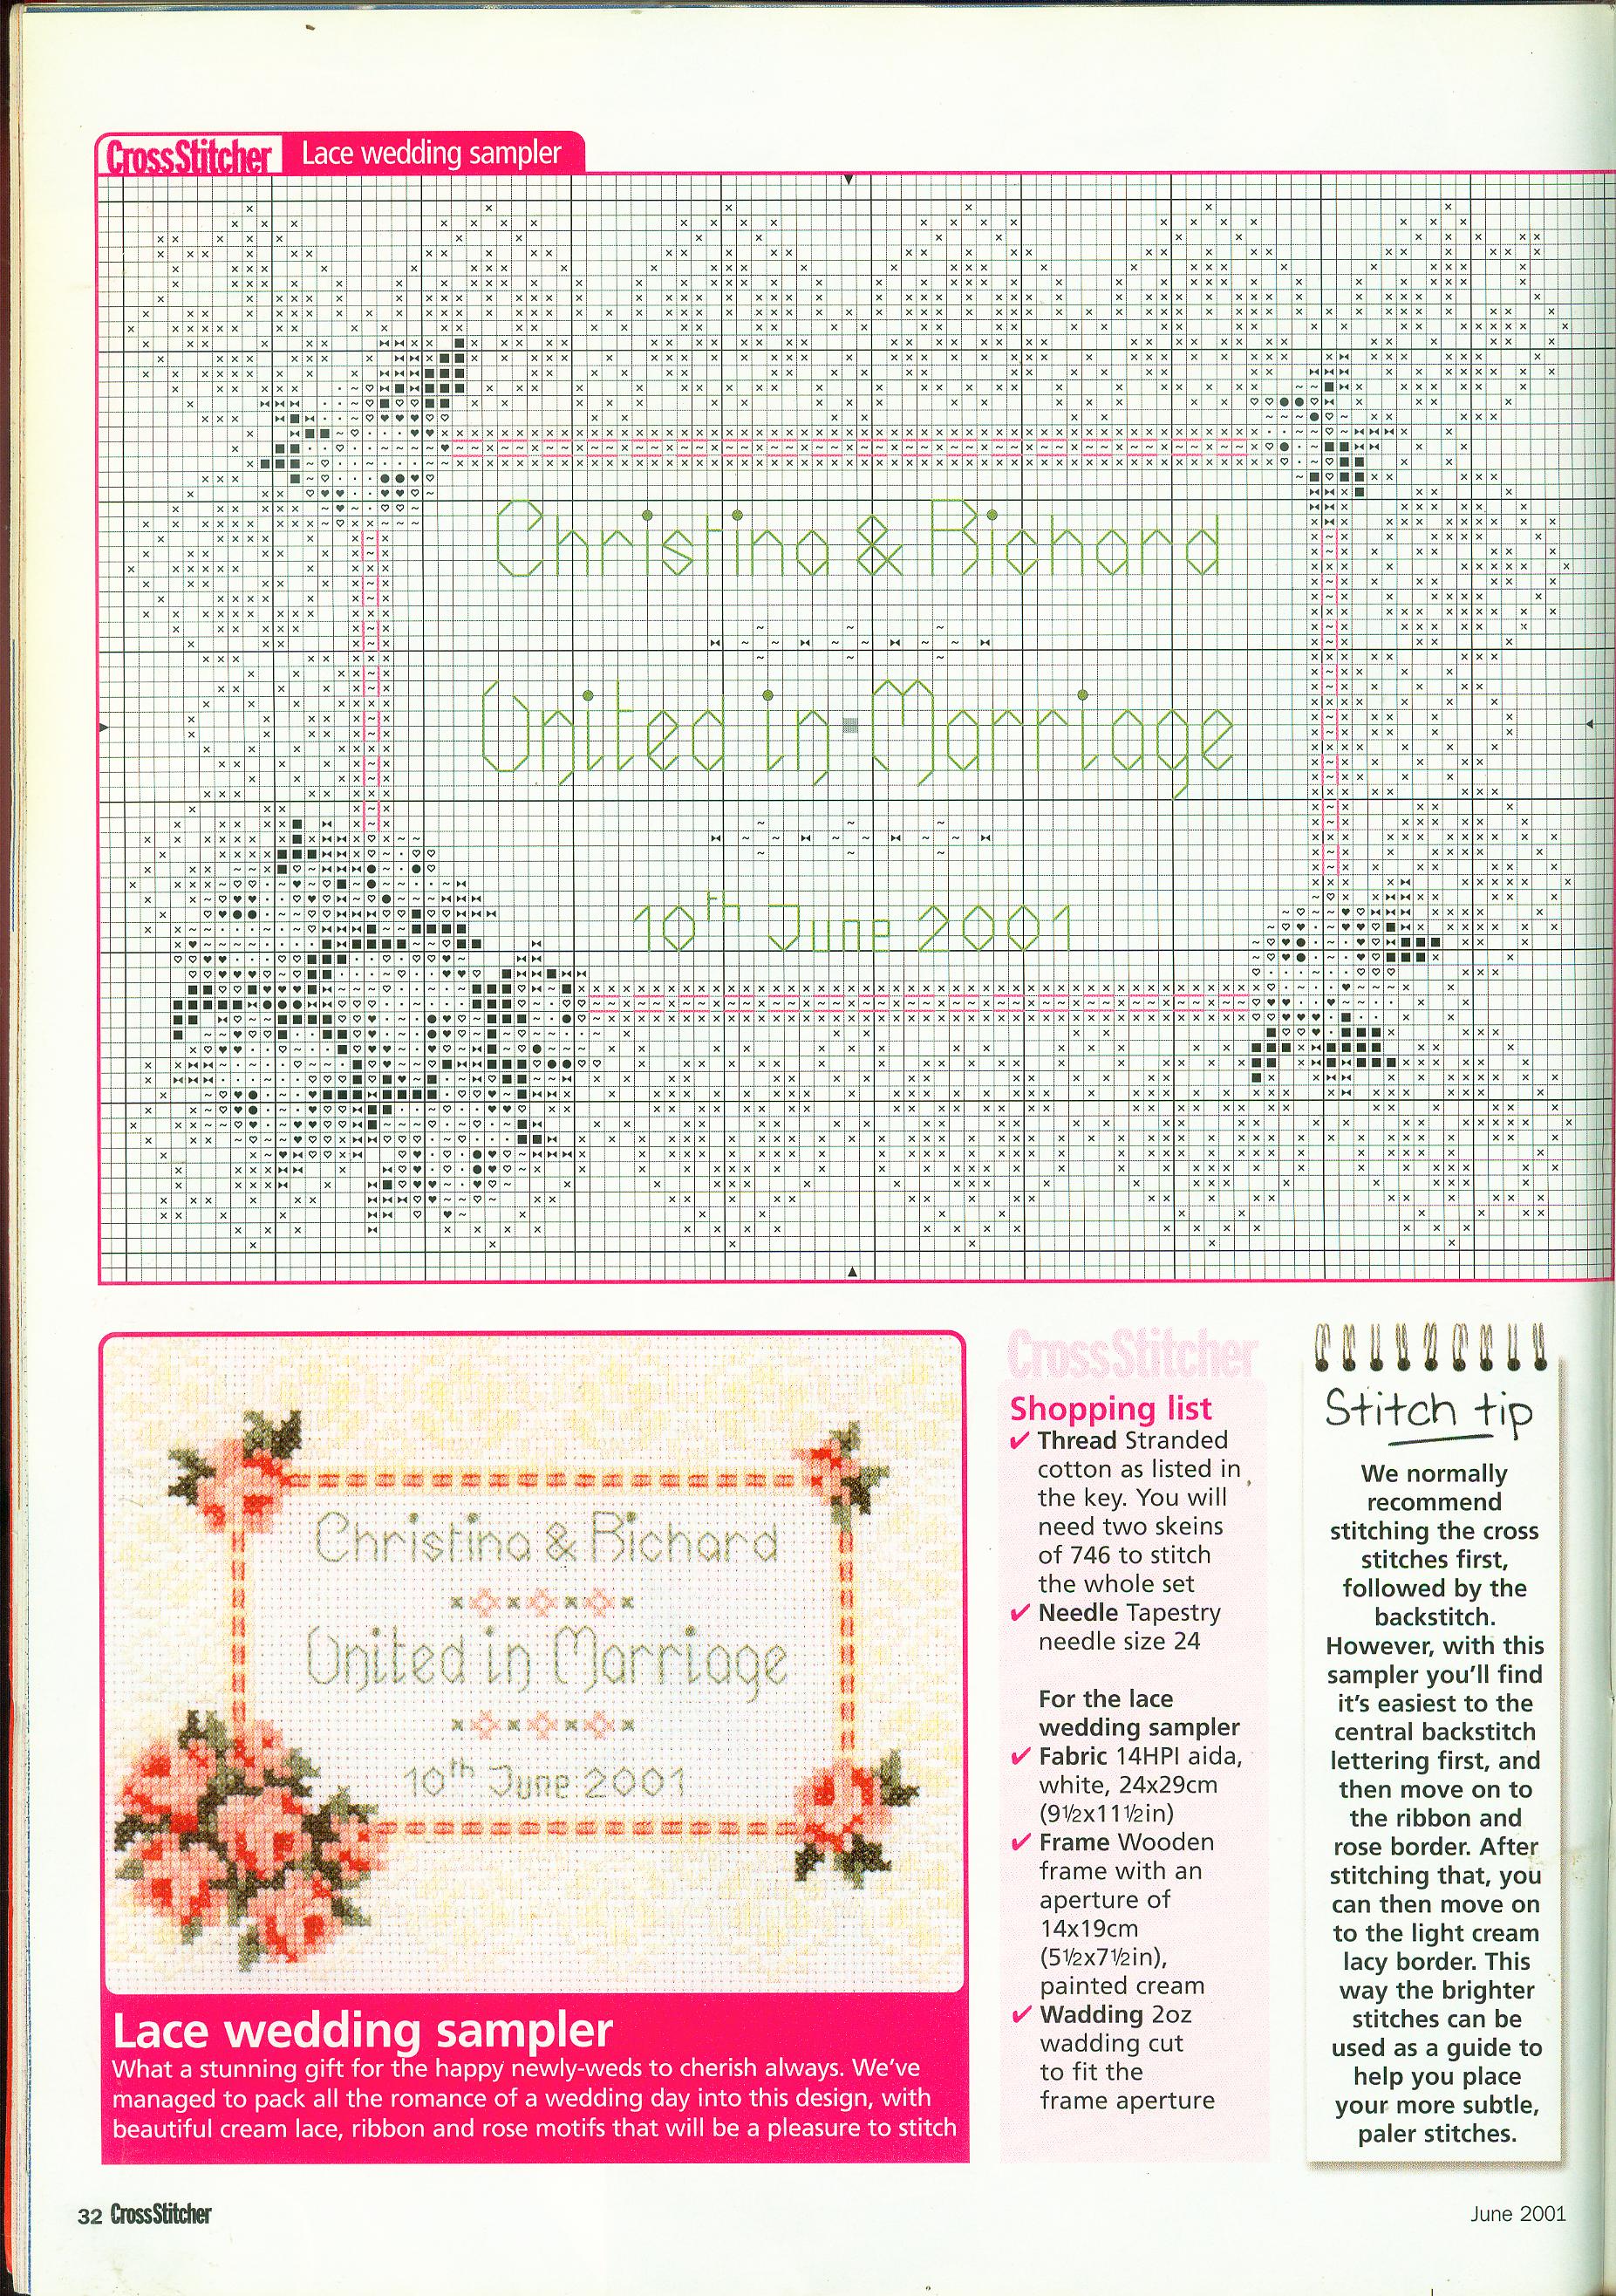 Picture for bride and groom cross stitch pattern(3)